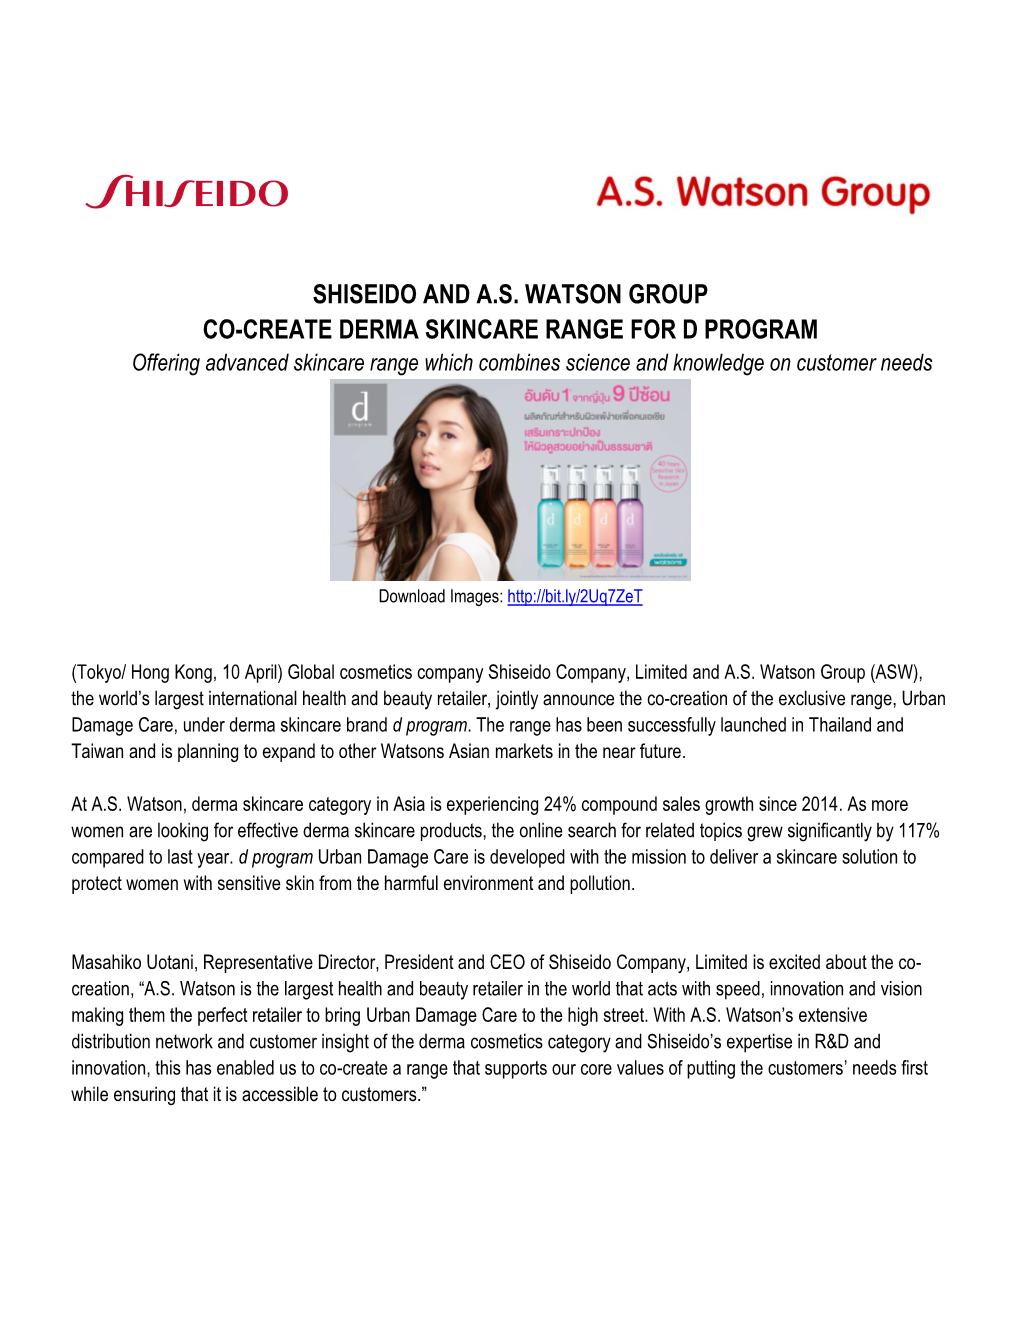 SHISEIDO and A.S. WATSON GROUP CO-CREATE DERMA SKINCARE RANGE for D PROGRAM Offering Advanced Skincare Range Which Combines Science and Knowledge on Customer Needs